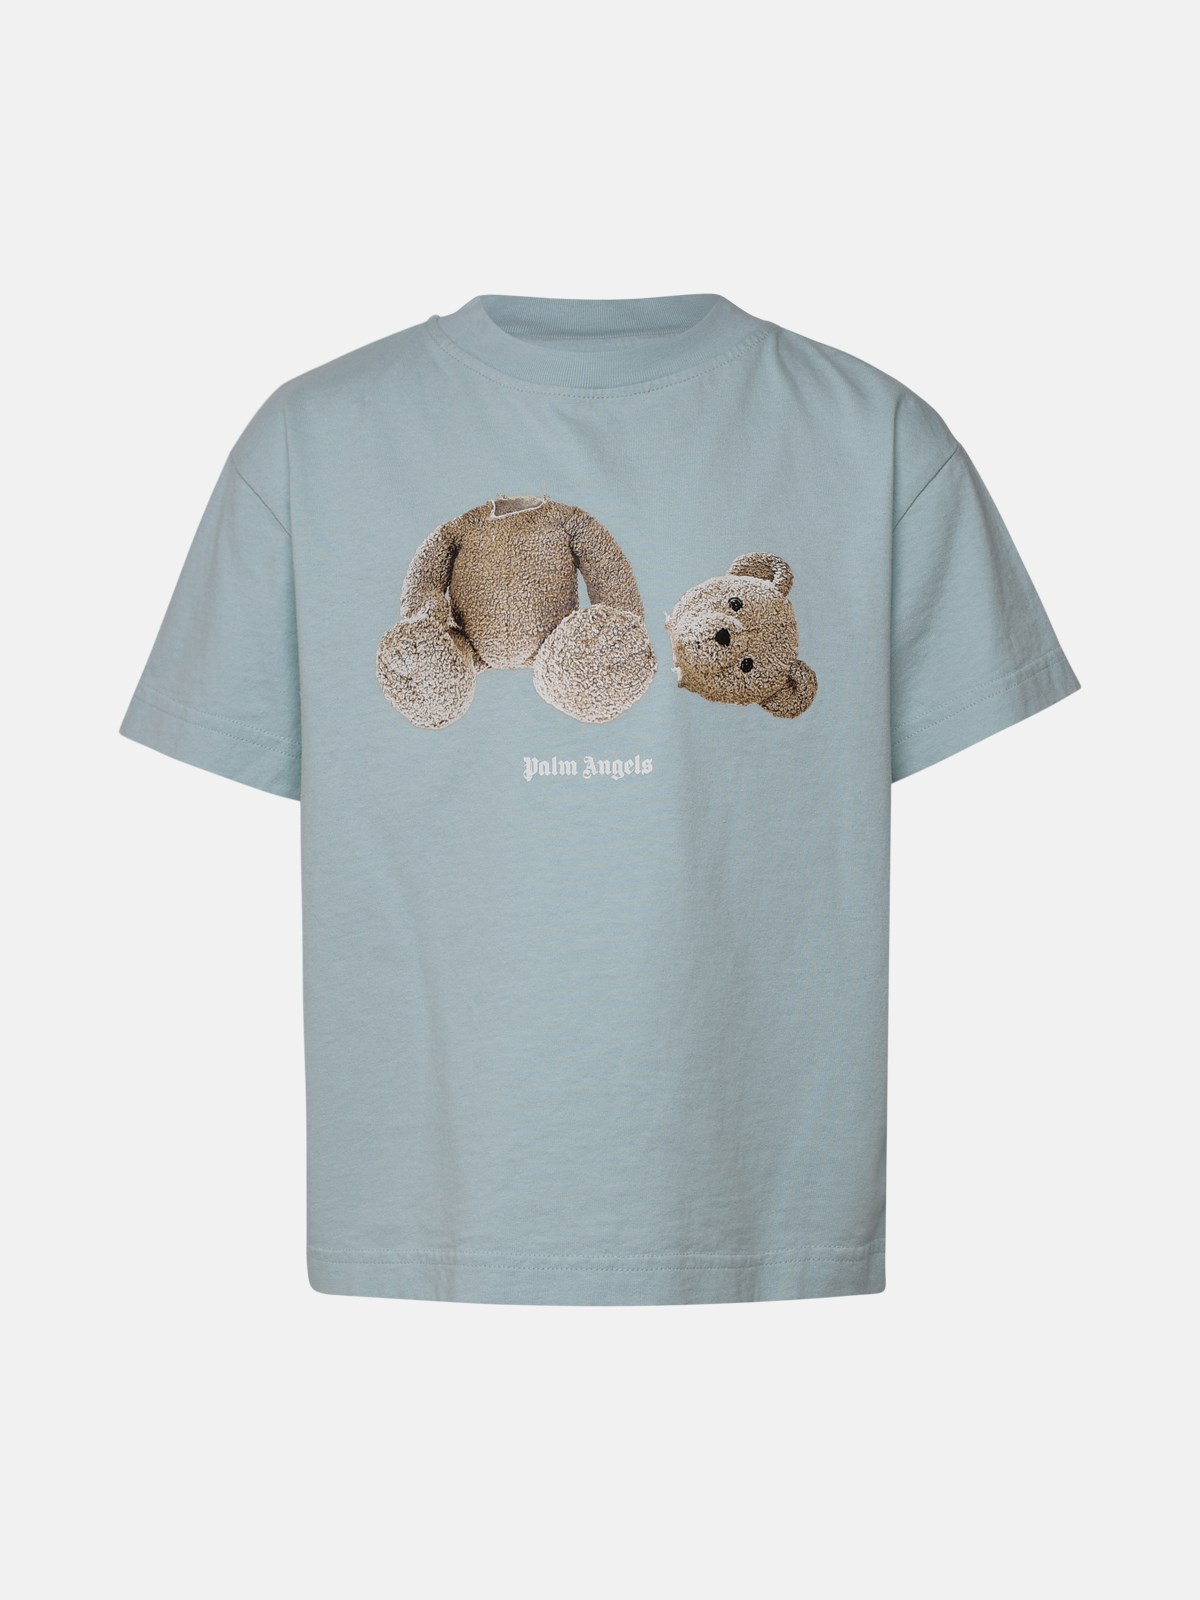 BEAR T-SHIRT in blue - Palm Angels® Official